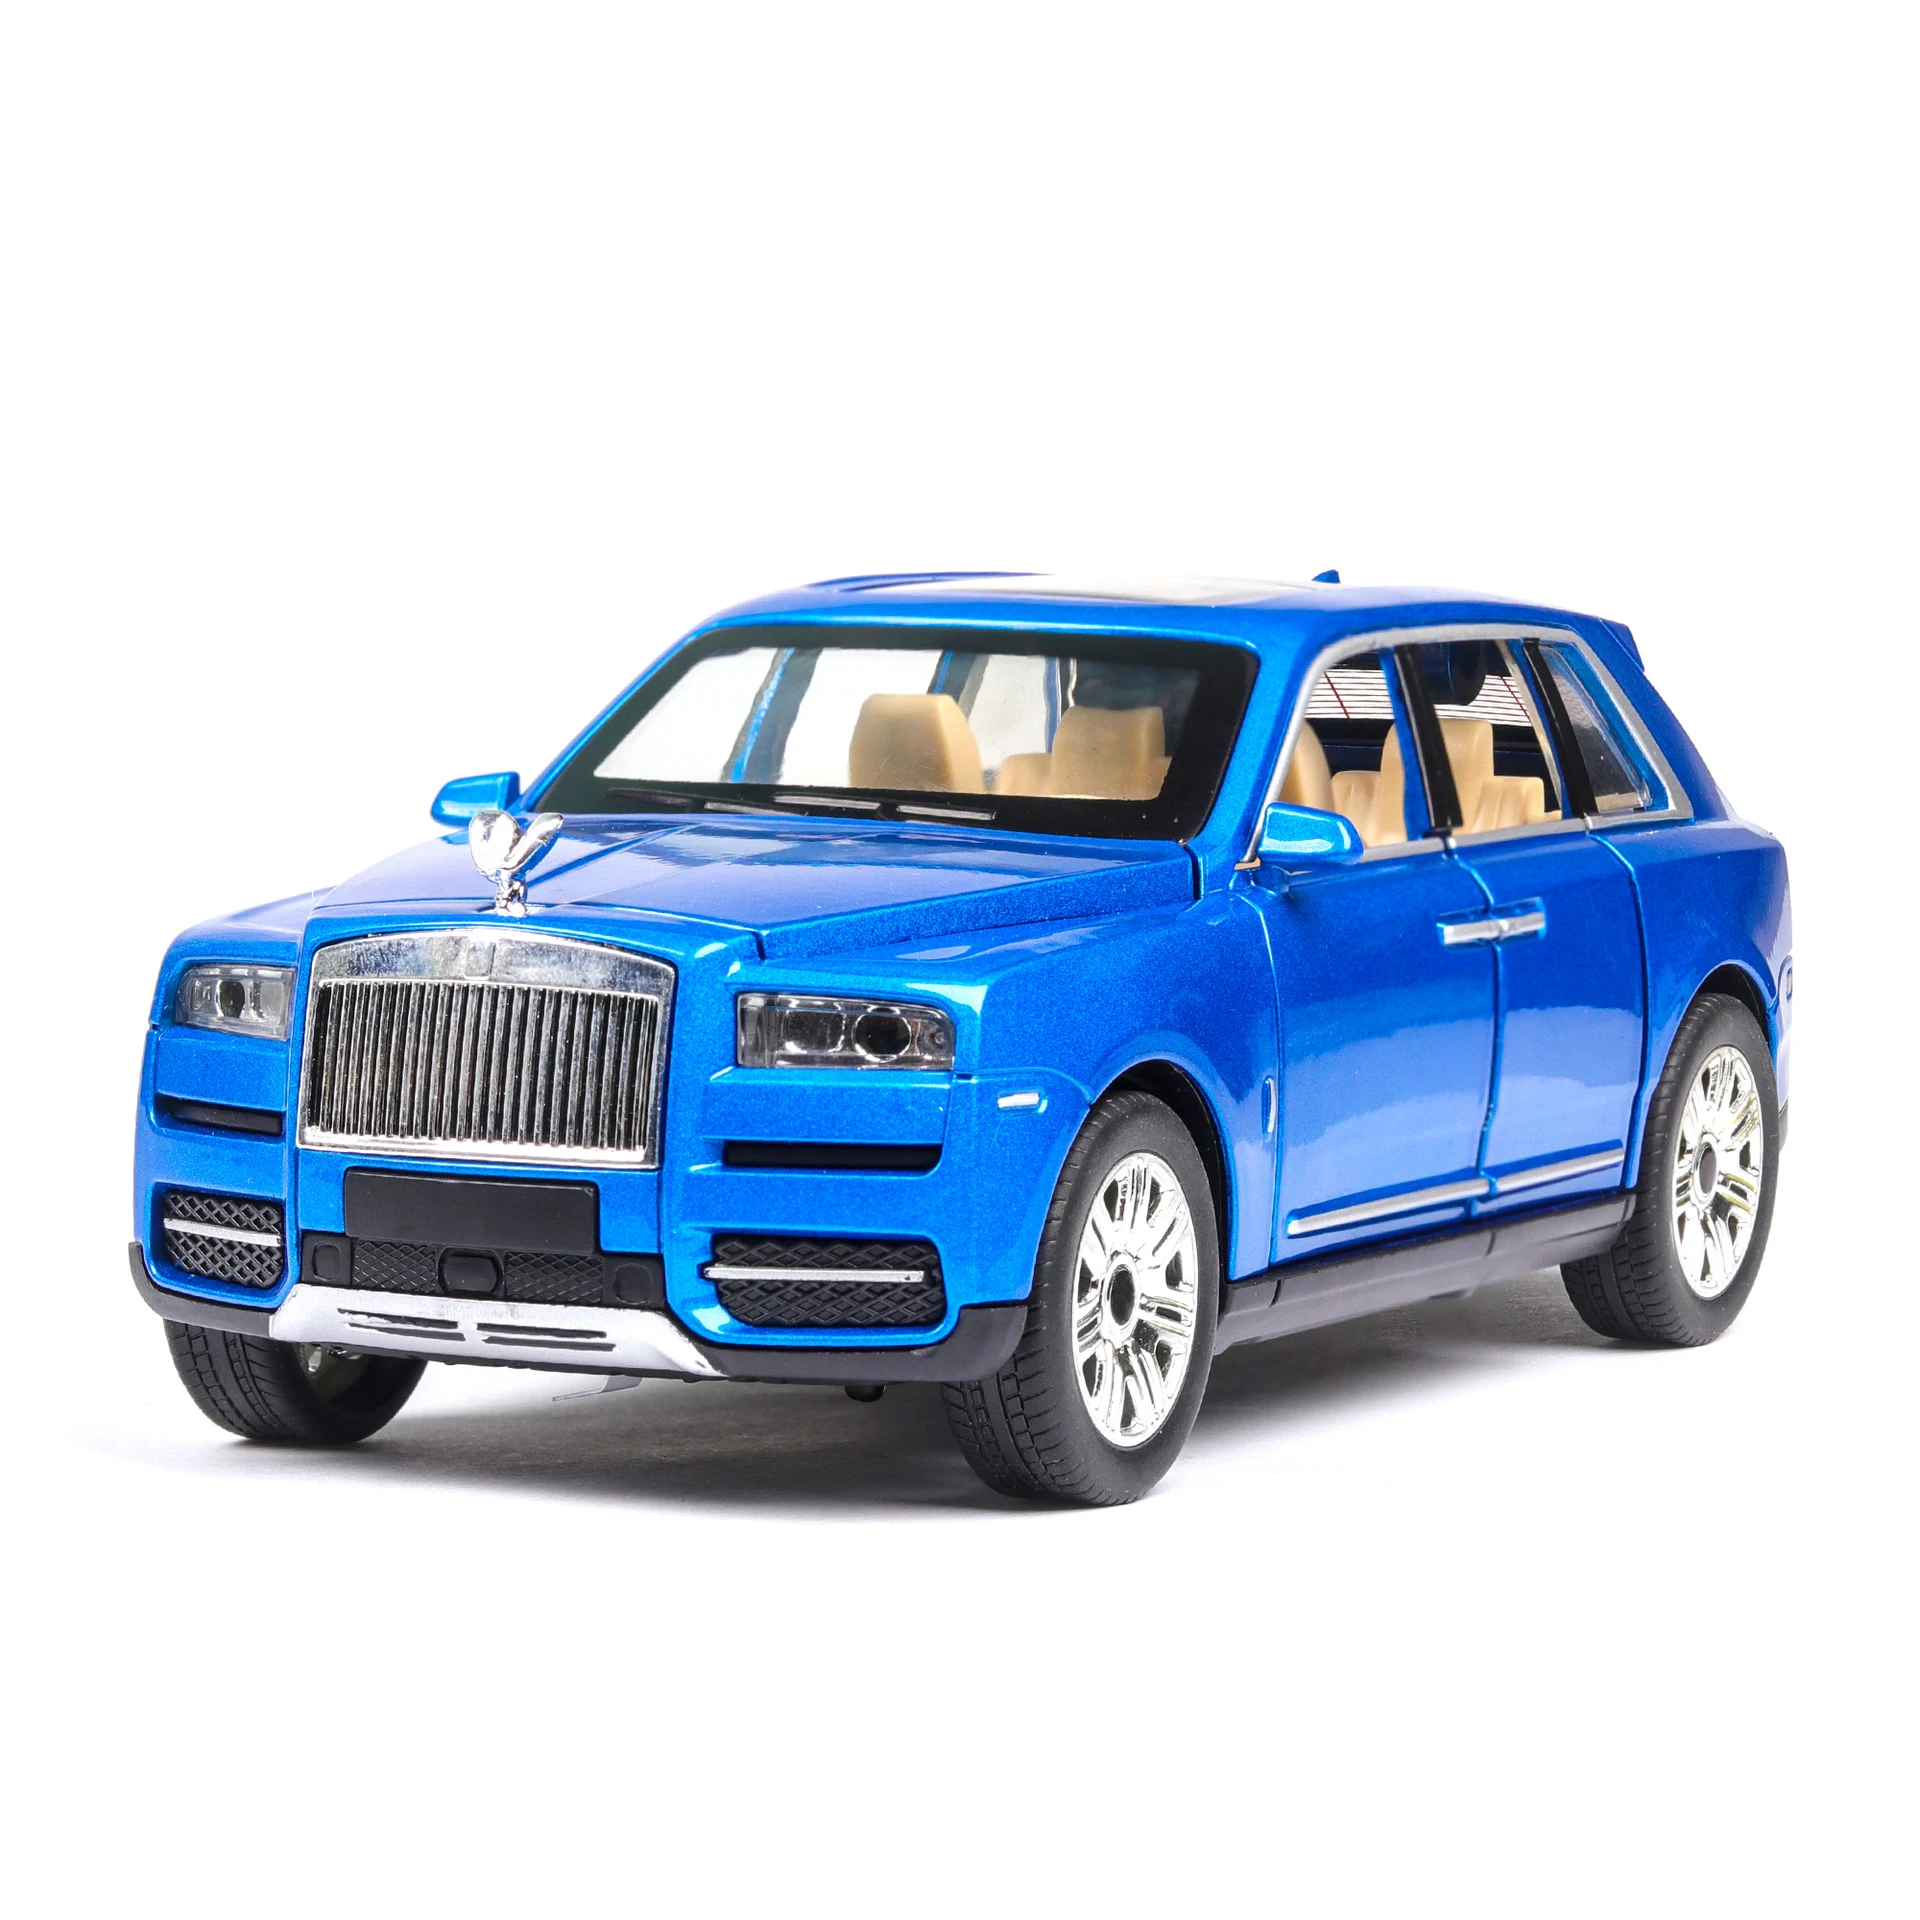 

1:24 Scale Diecast Car Model Toy Vehicle Simulation SUV Metal Car Wheels Alloy Sound Light Pull Back Car For Boys Kids Toys Gift